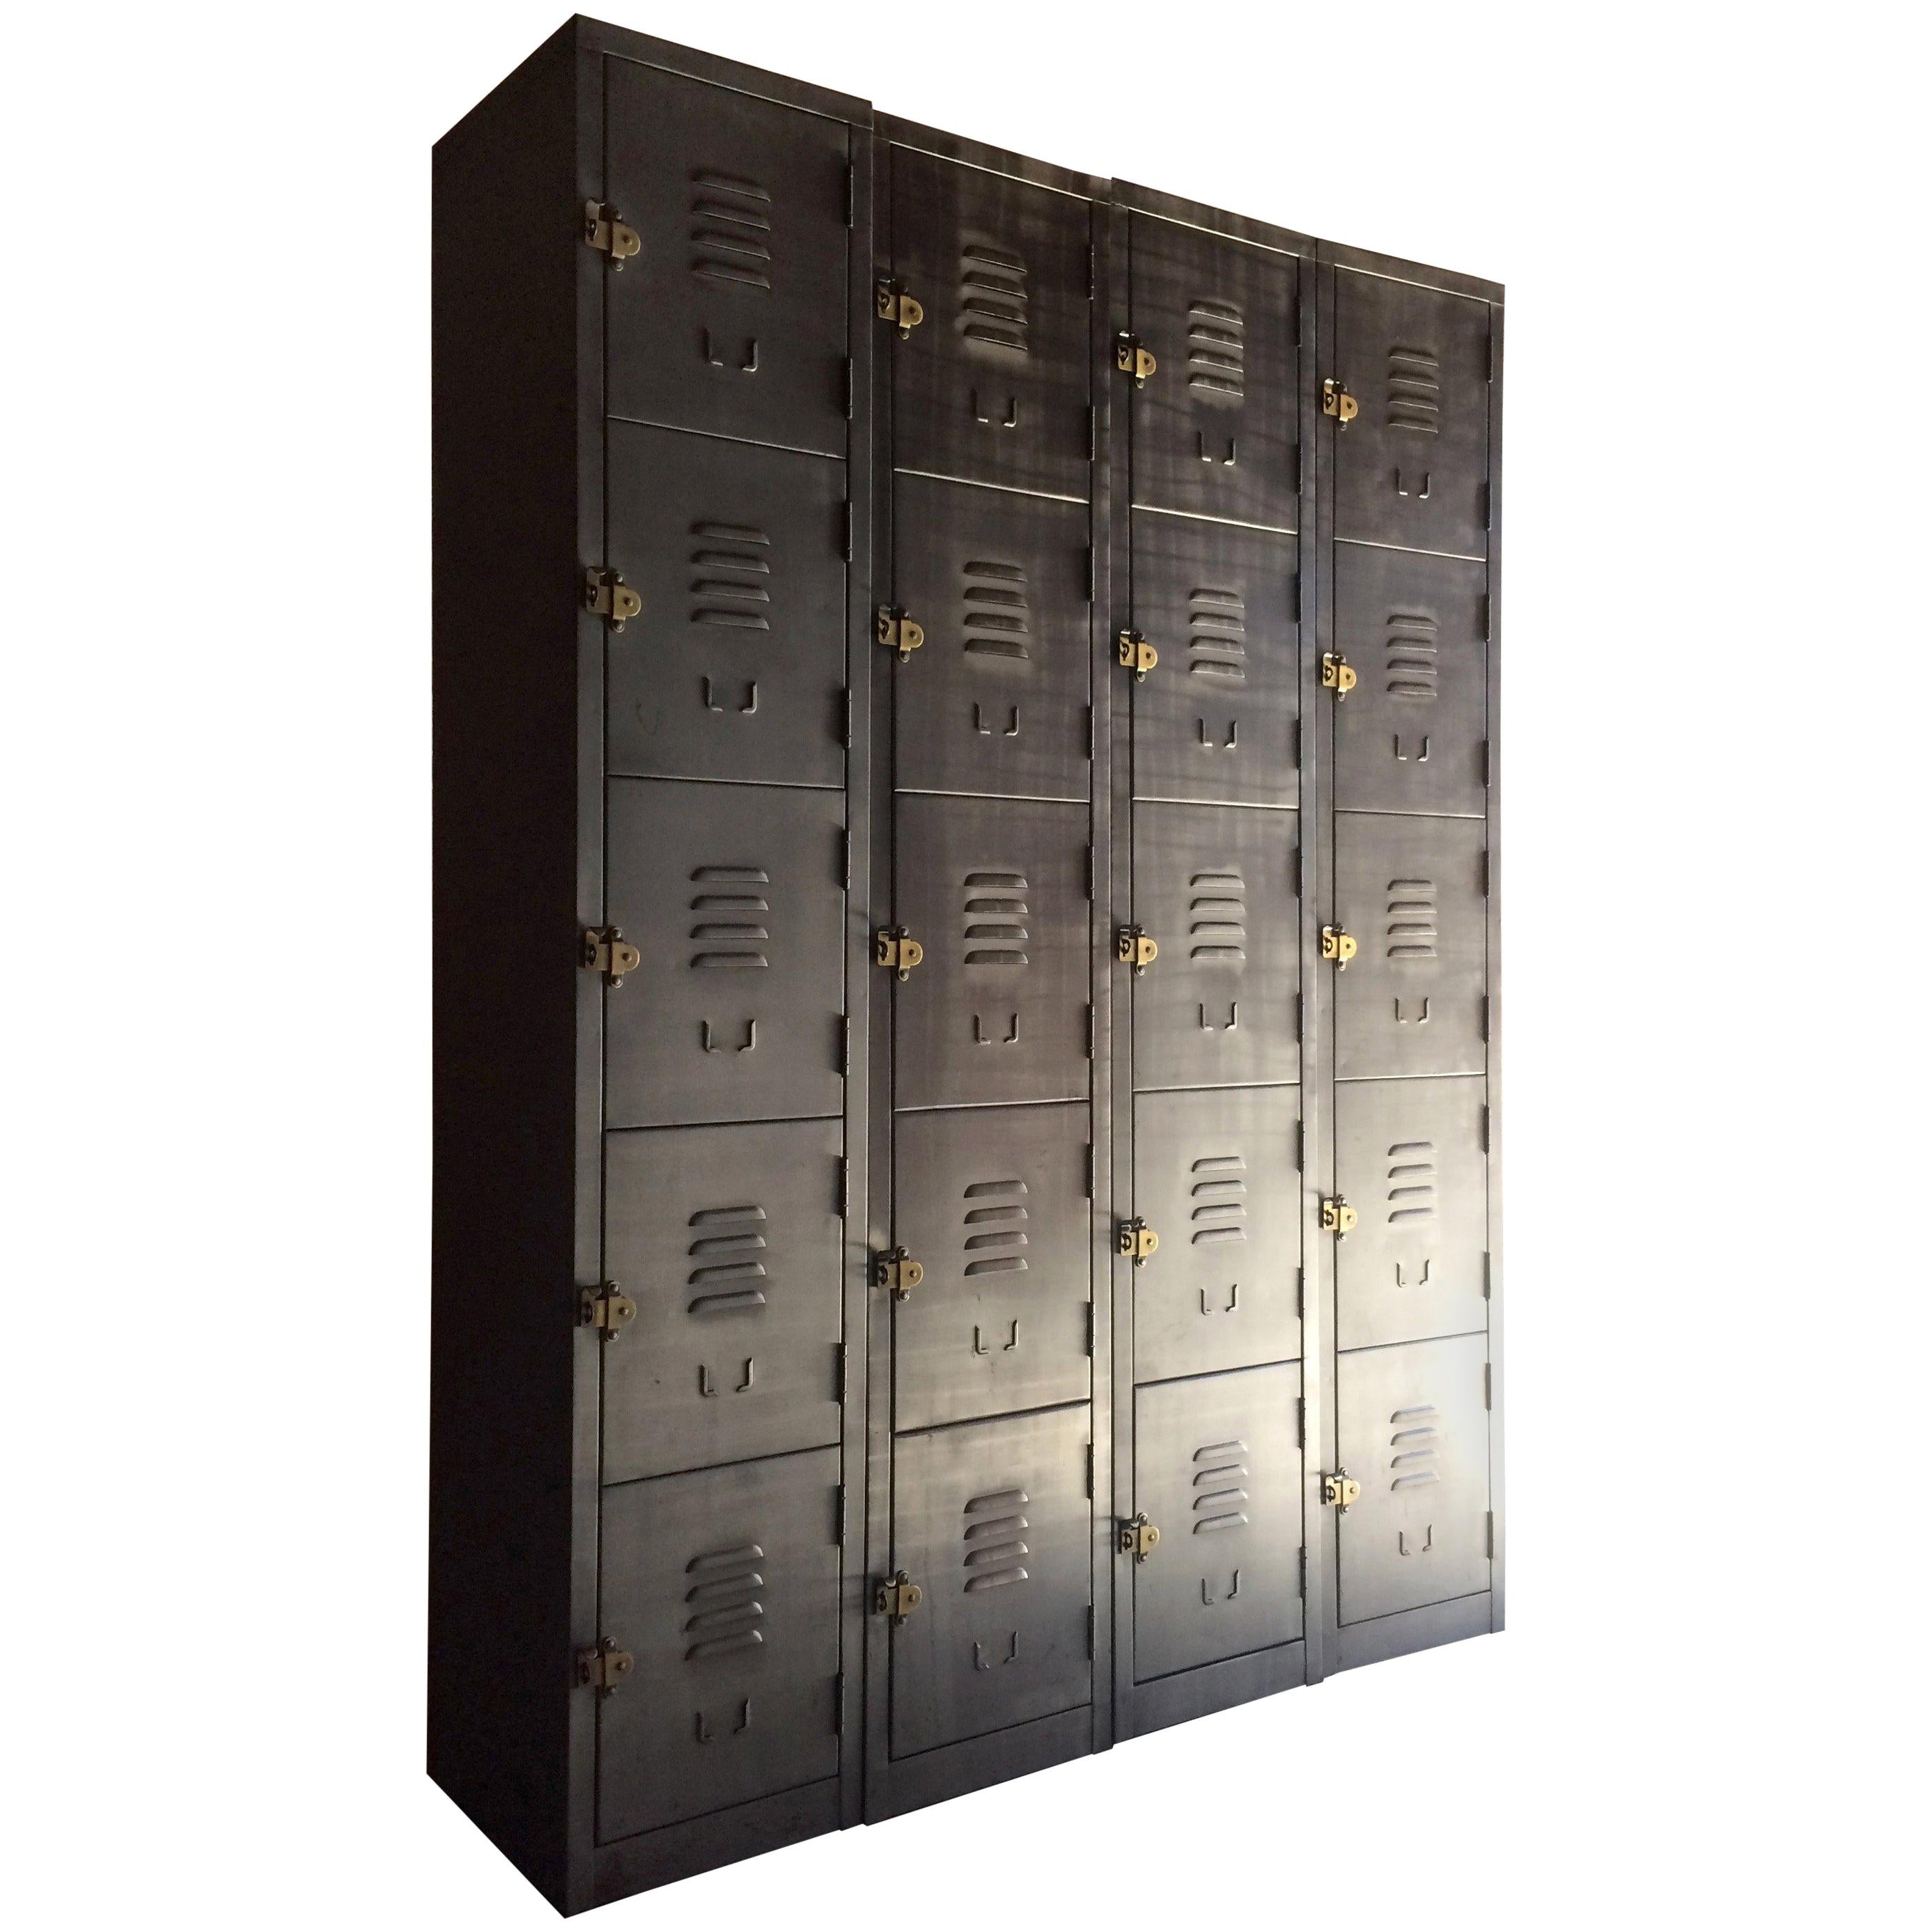 Stunning Industrial Metal Lockers Loft Style Brushed Steel Cabinets 20 Cabinets